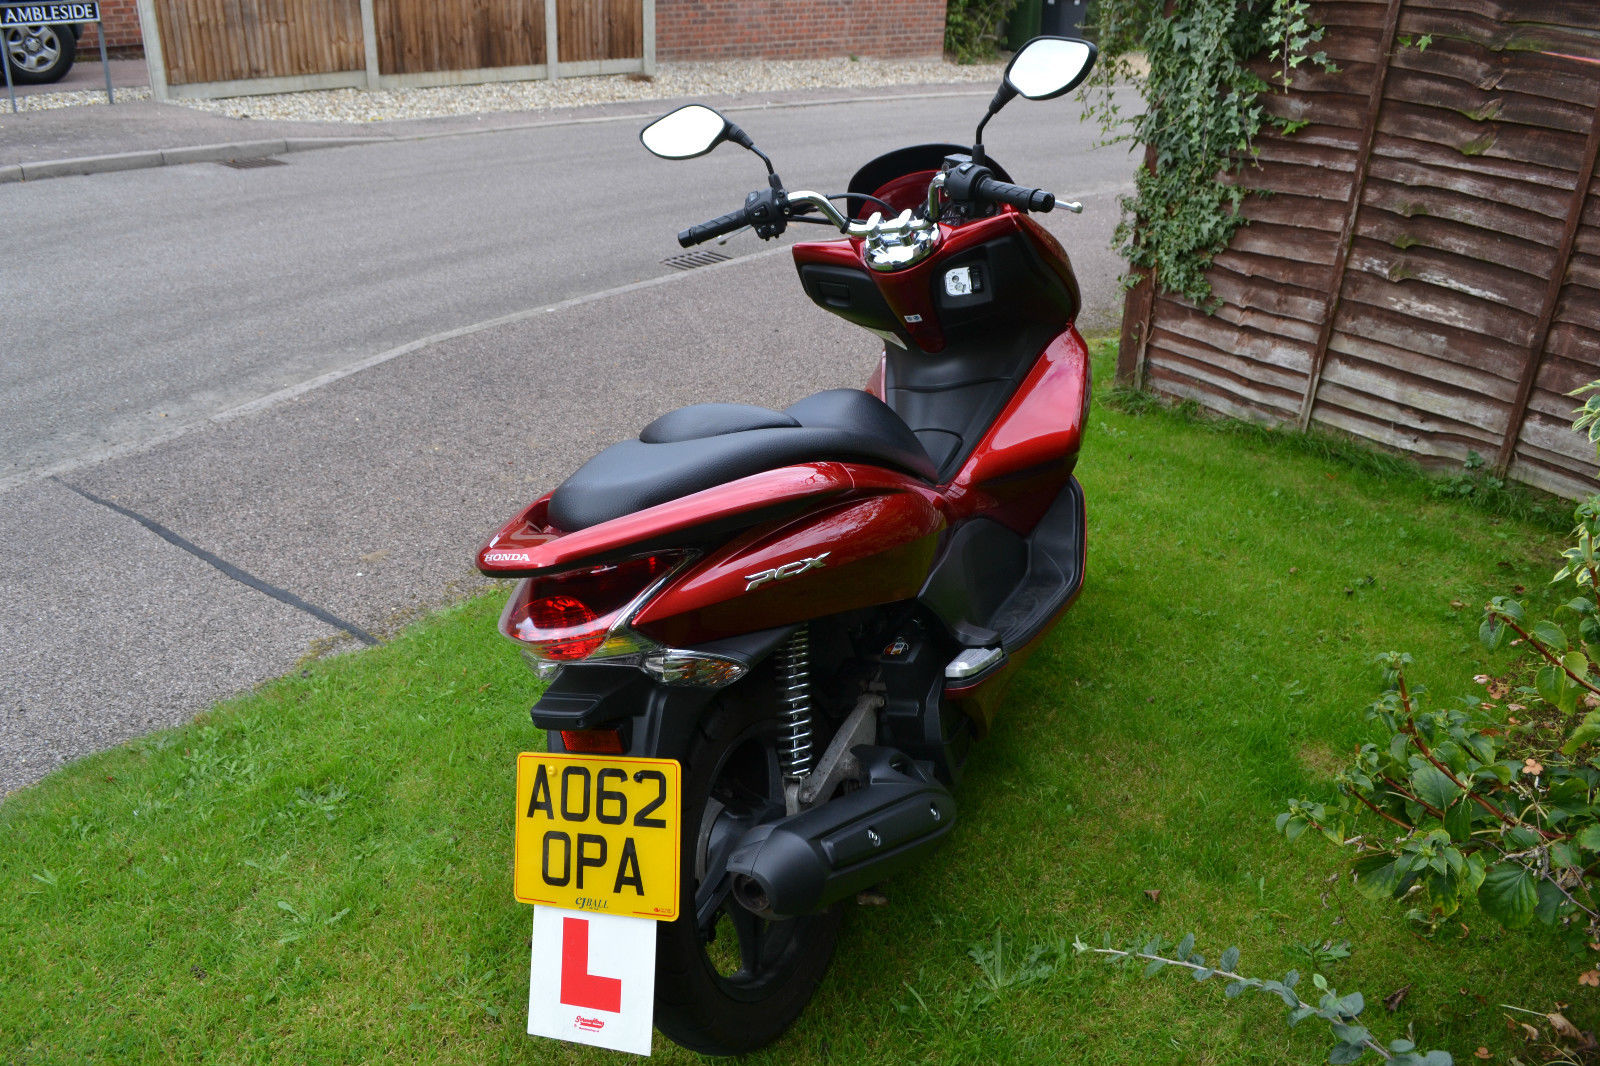 Honda Pcx 125 Immaculate Condition 00 Miles One Owner Full Honda Sh